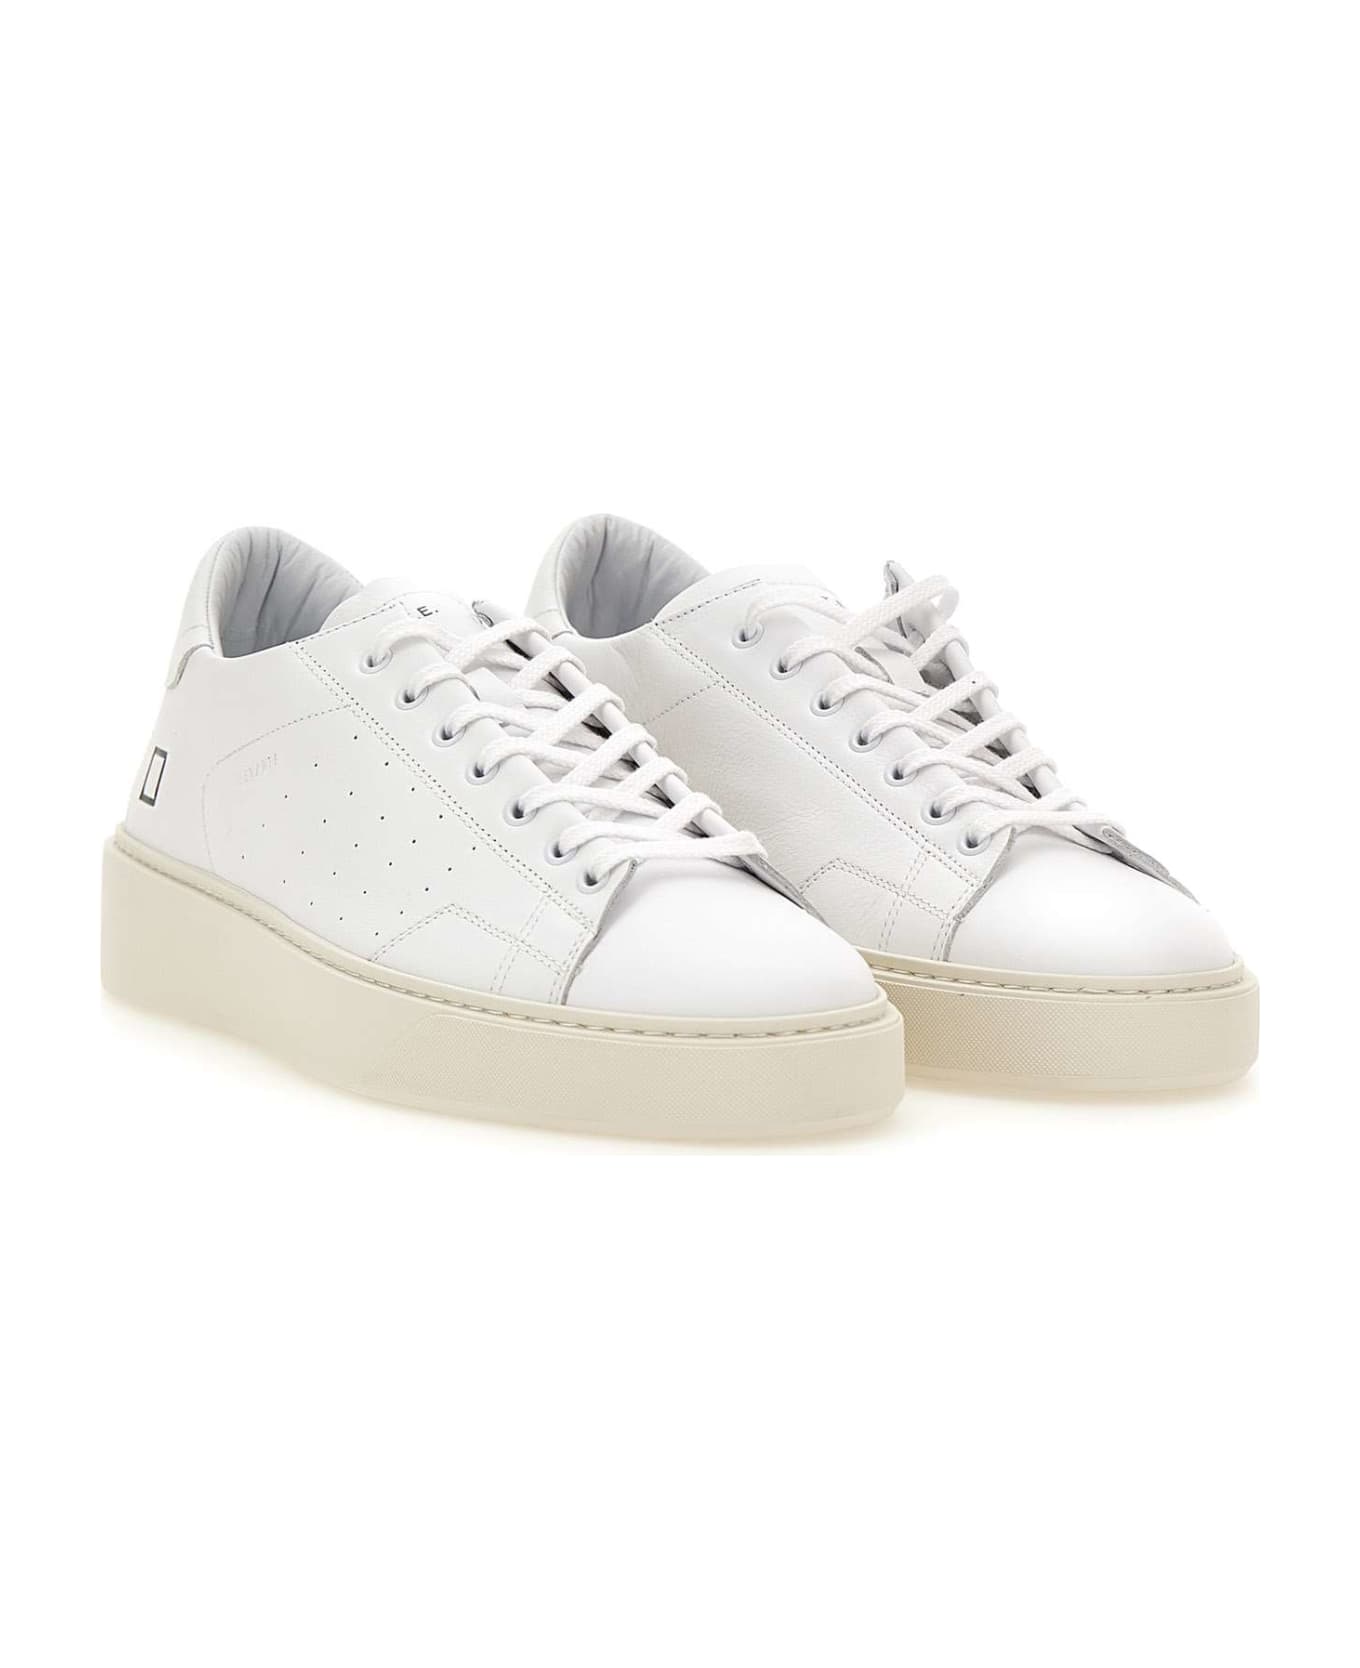 D.A.T.E. "levante" Leather Sneakers - WHITE スニーカー